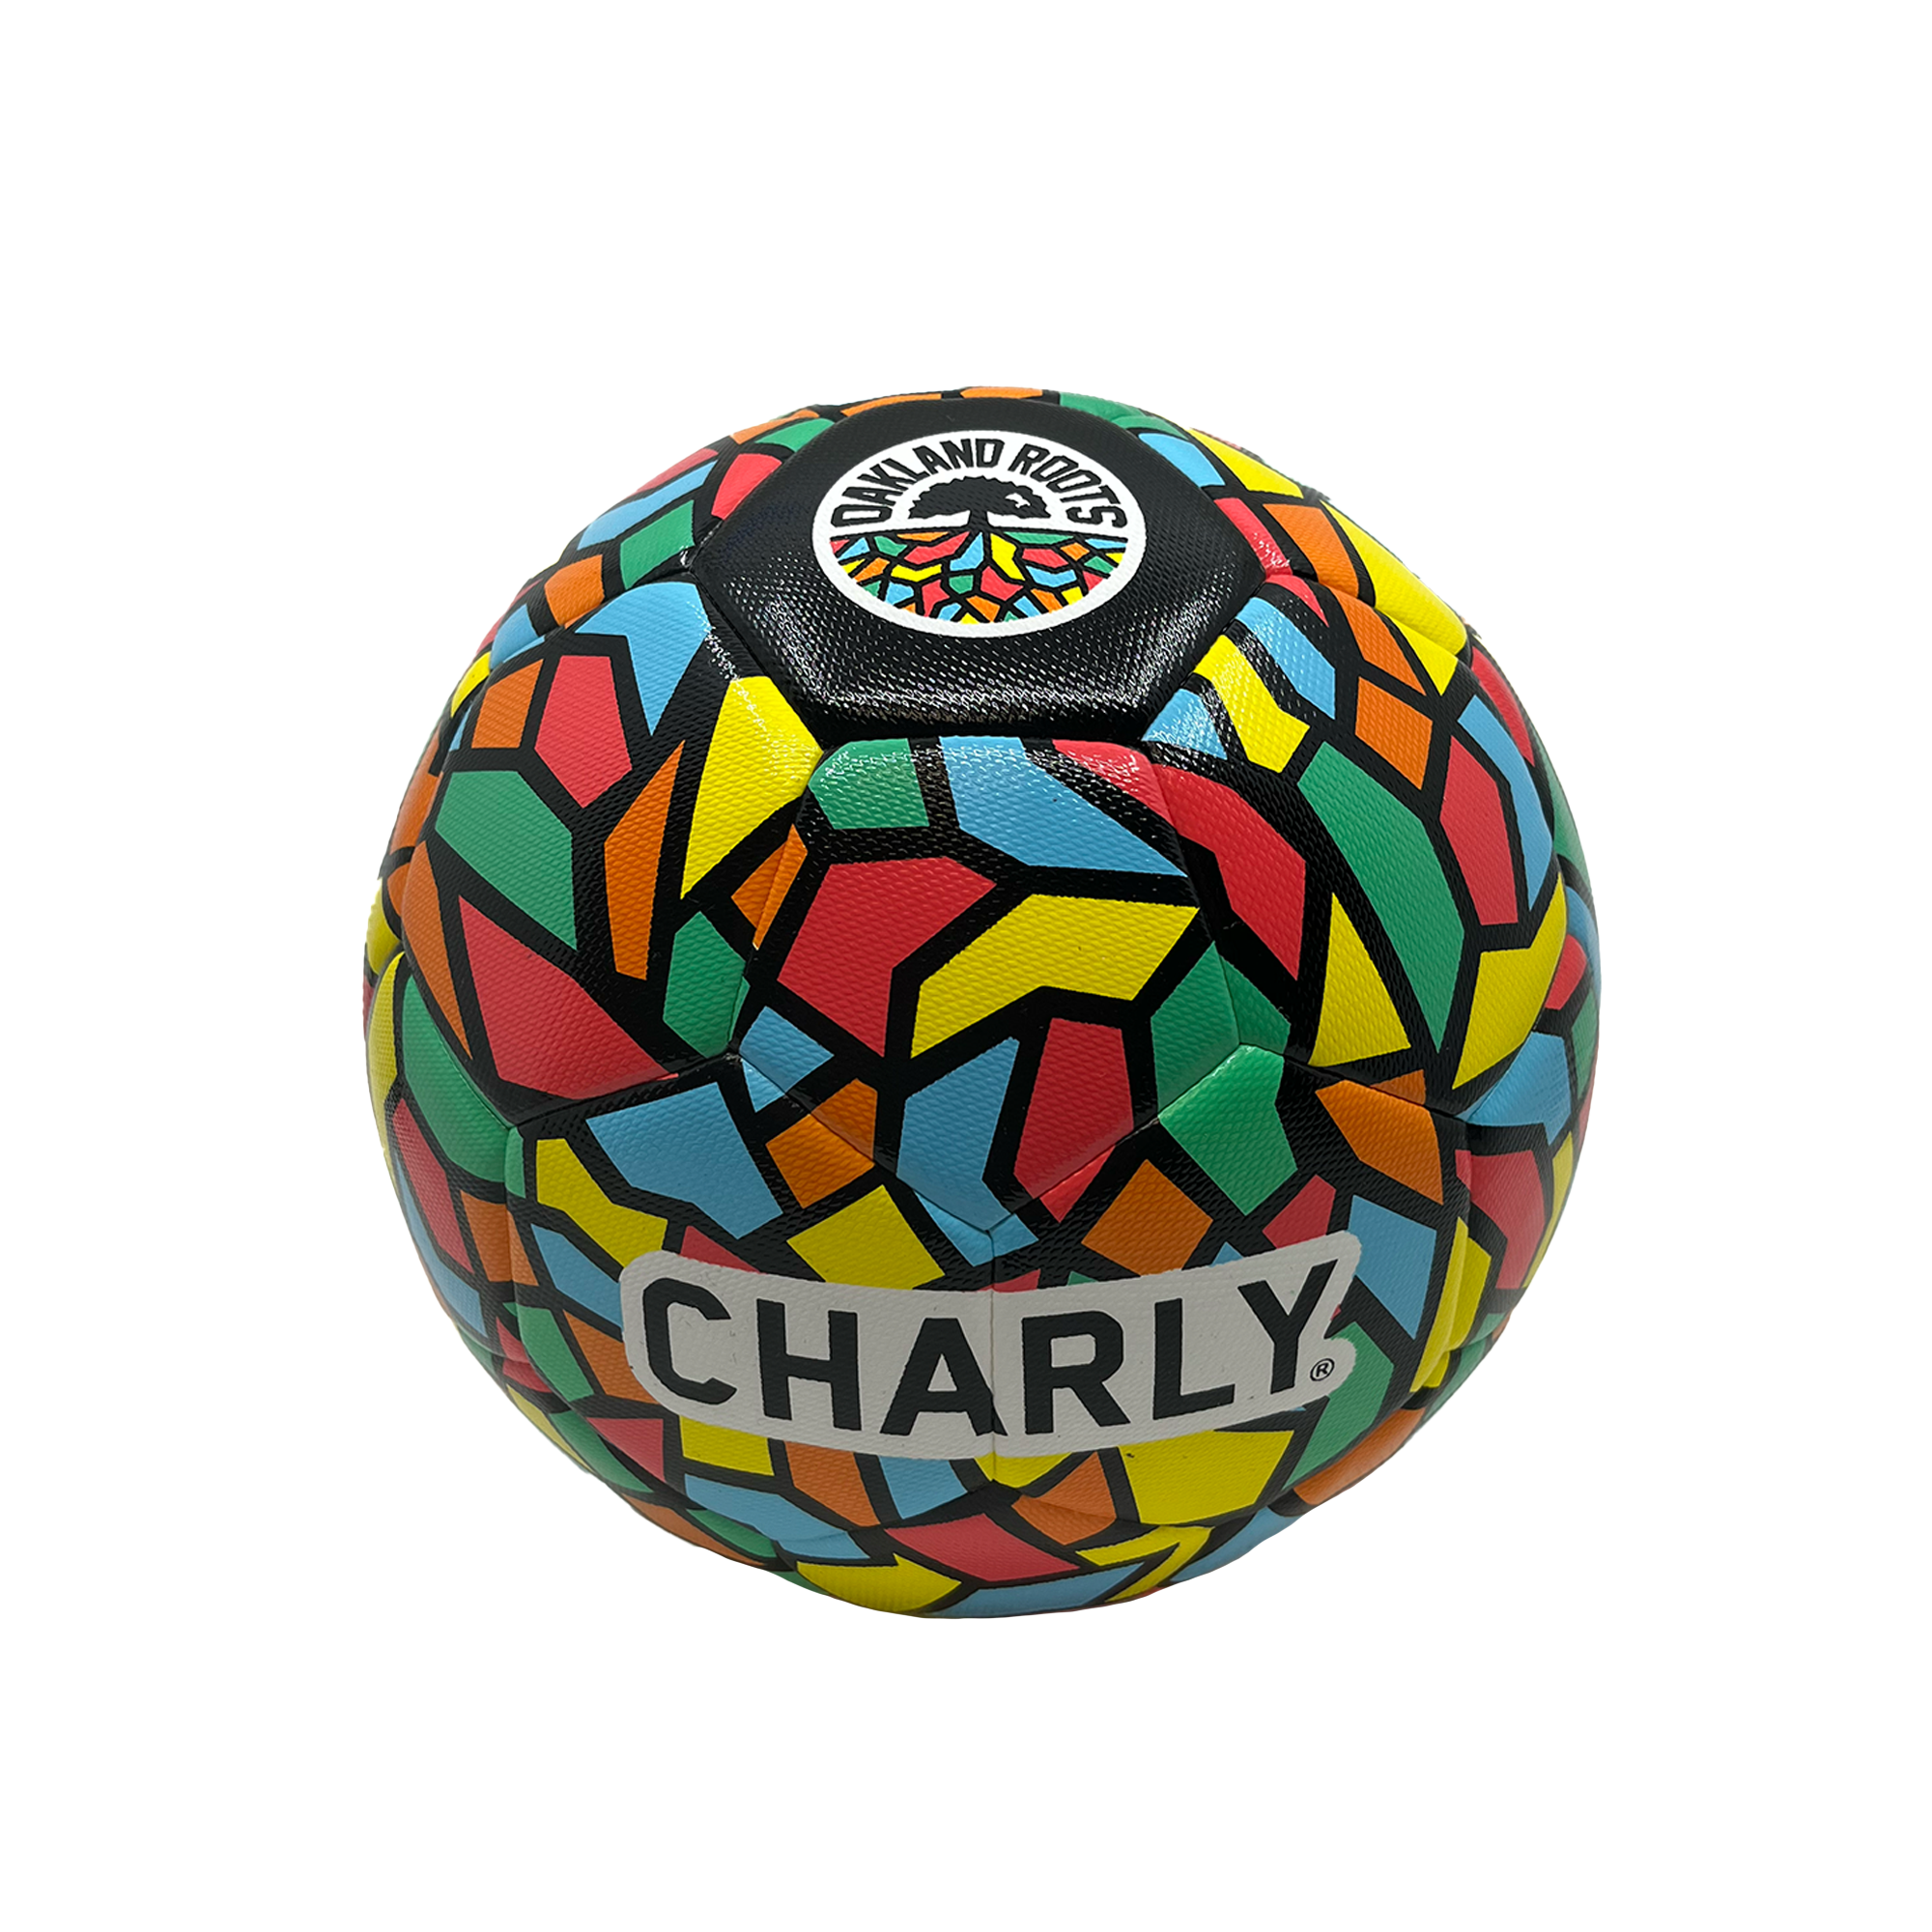 Oakland Roots SC x Charly Size 5 Soccer Ball